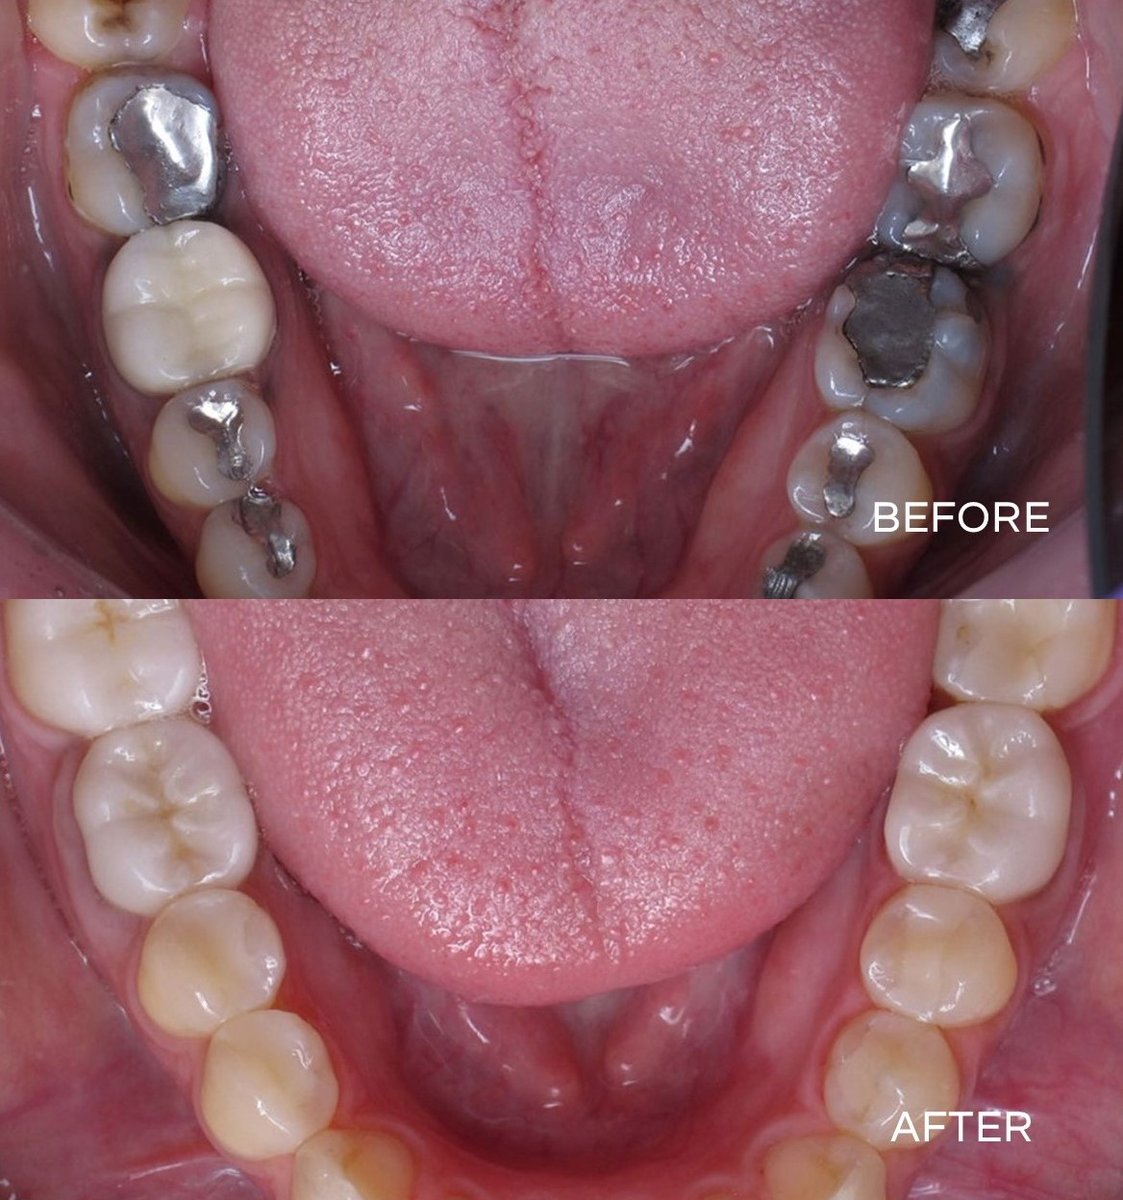 The before photo is of a patient who wanted to replace their amalgam fillings. The after photo was achieved with the installation of coloured composite dental fillings.

#flossdental #thetoothdr #flossboss #beforeandafter #fillings #repost #andersondentistry #trinidadandtobago